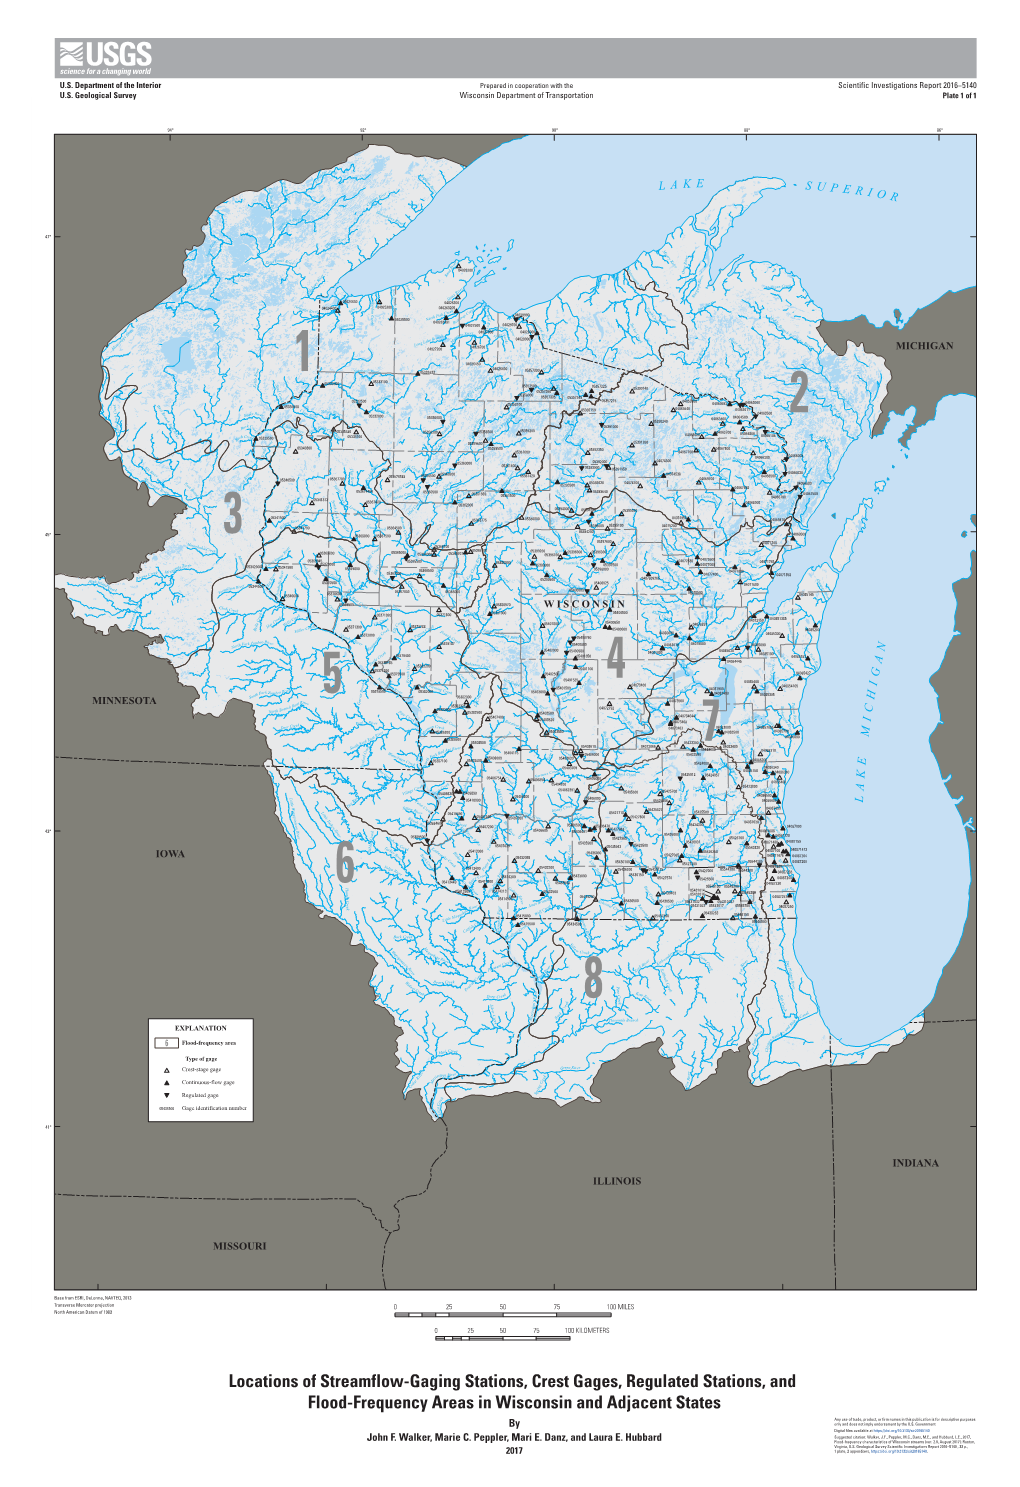 Locations of Streamflow-Gaging Stations, Crest Gages, Regulated Stations, and Flood-Frequency Areas in Wisconsin and Adjacent States